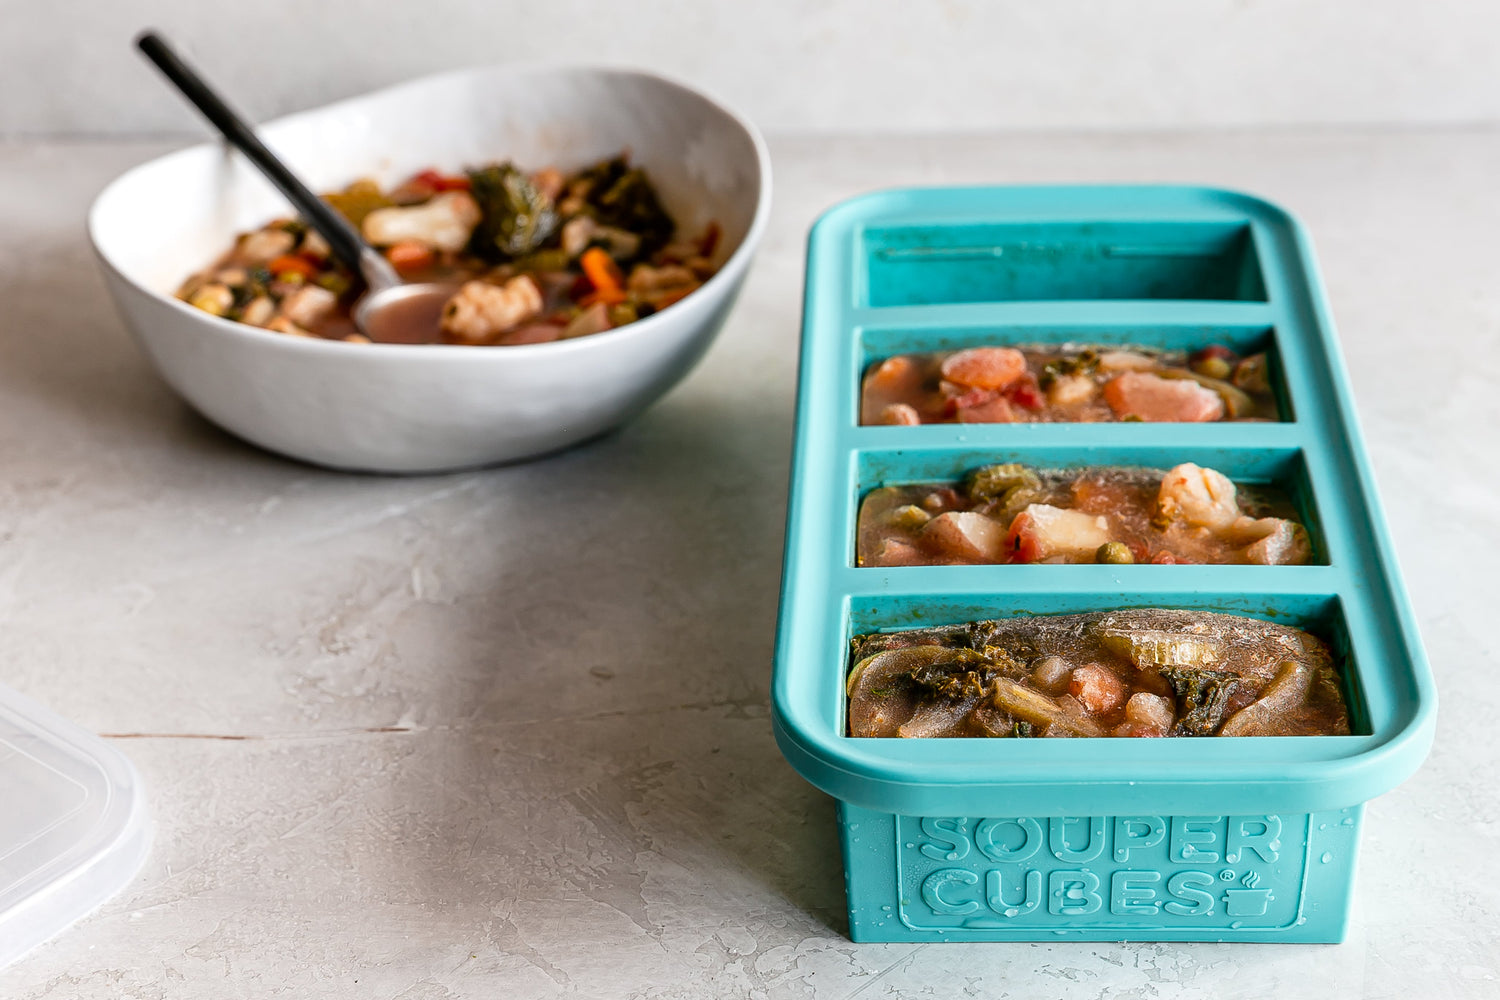 ½ cup Souper Cubes tray filled with frozen soup. Behind the tray is a white bowl filled with reheated soup.  